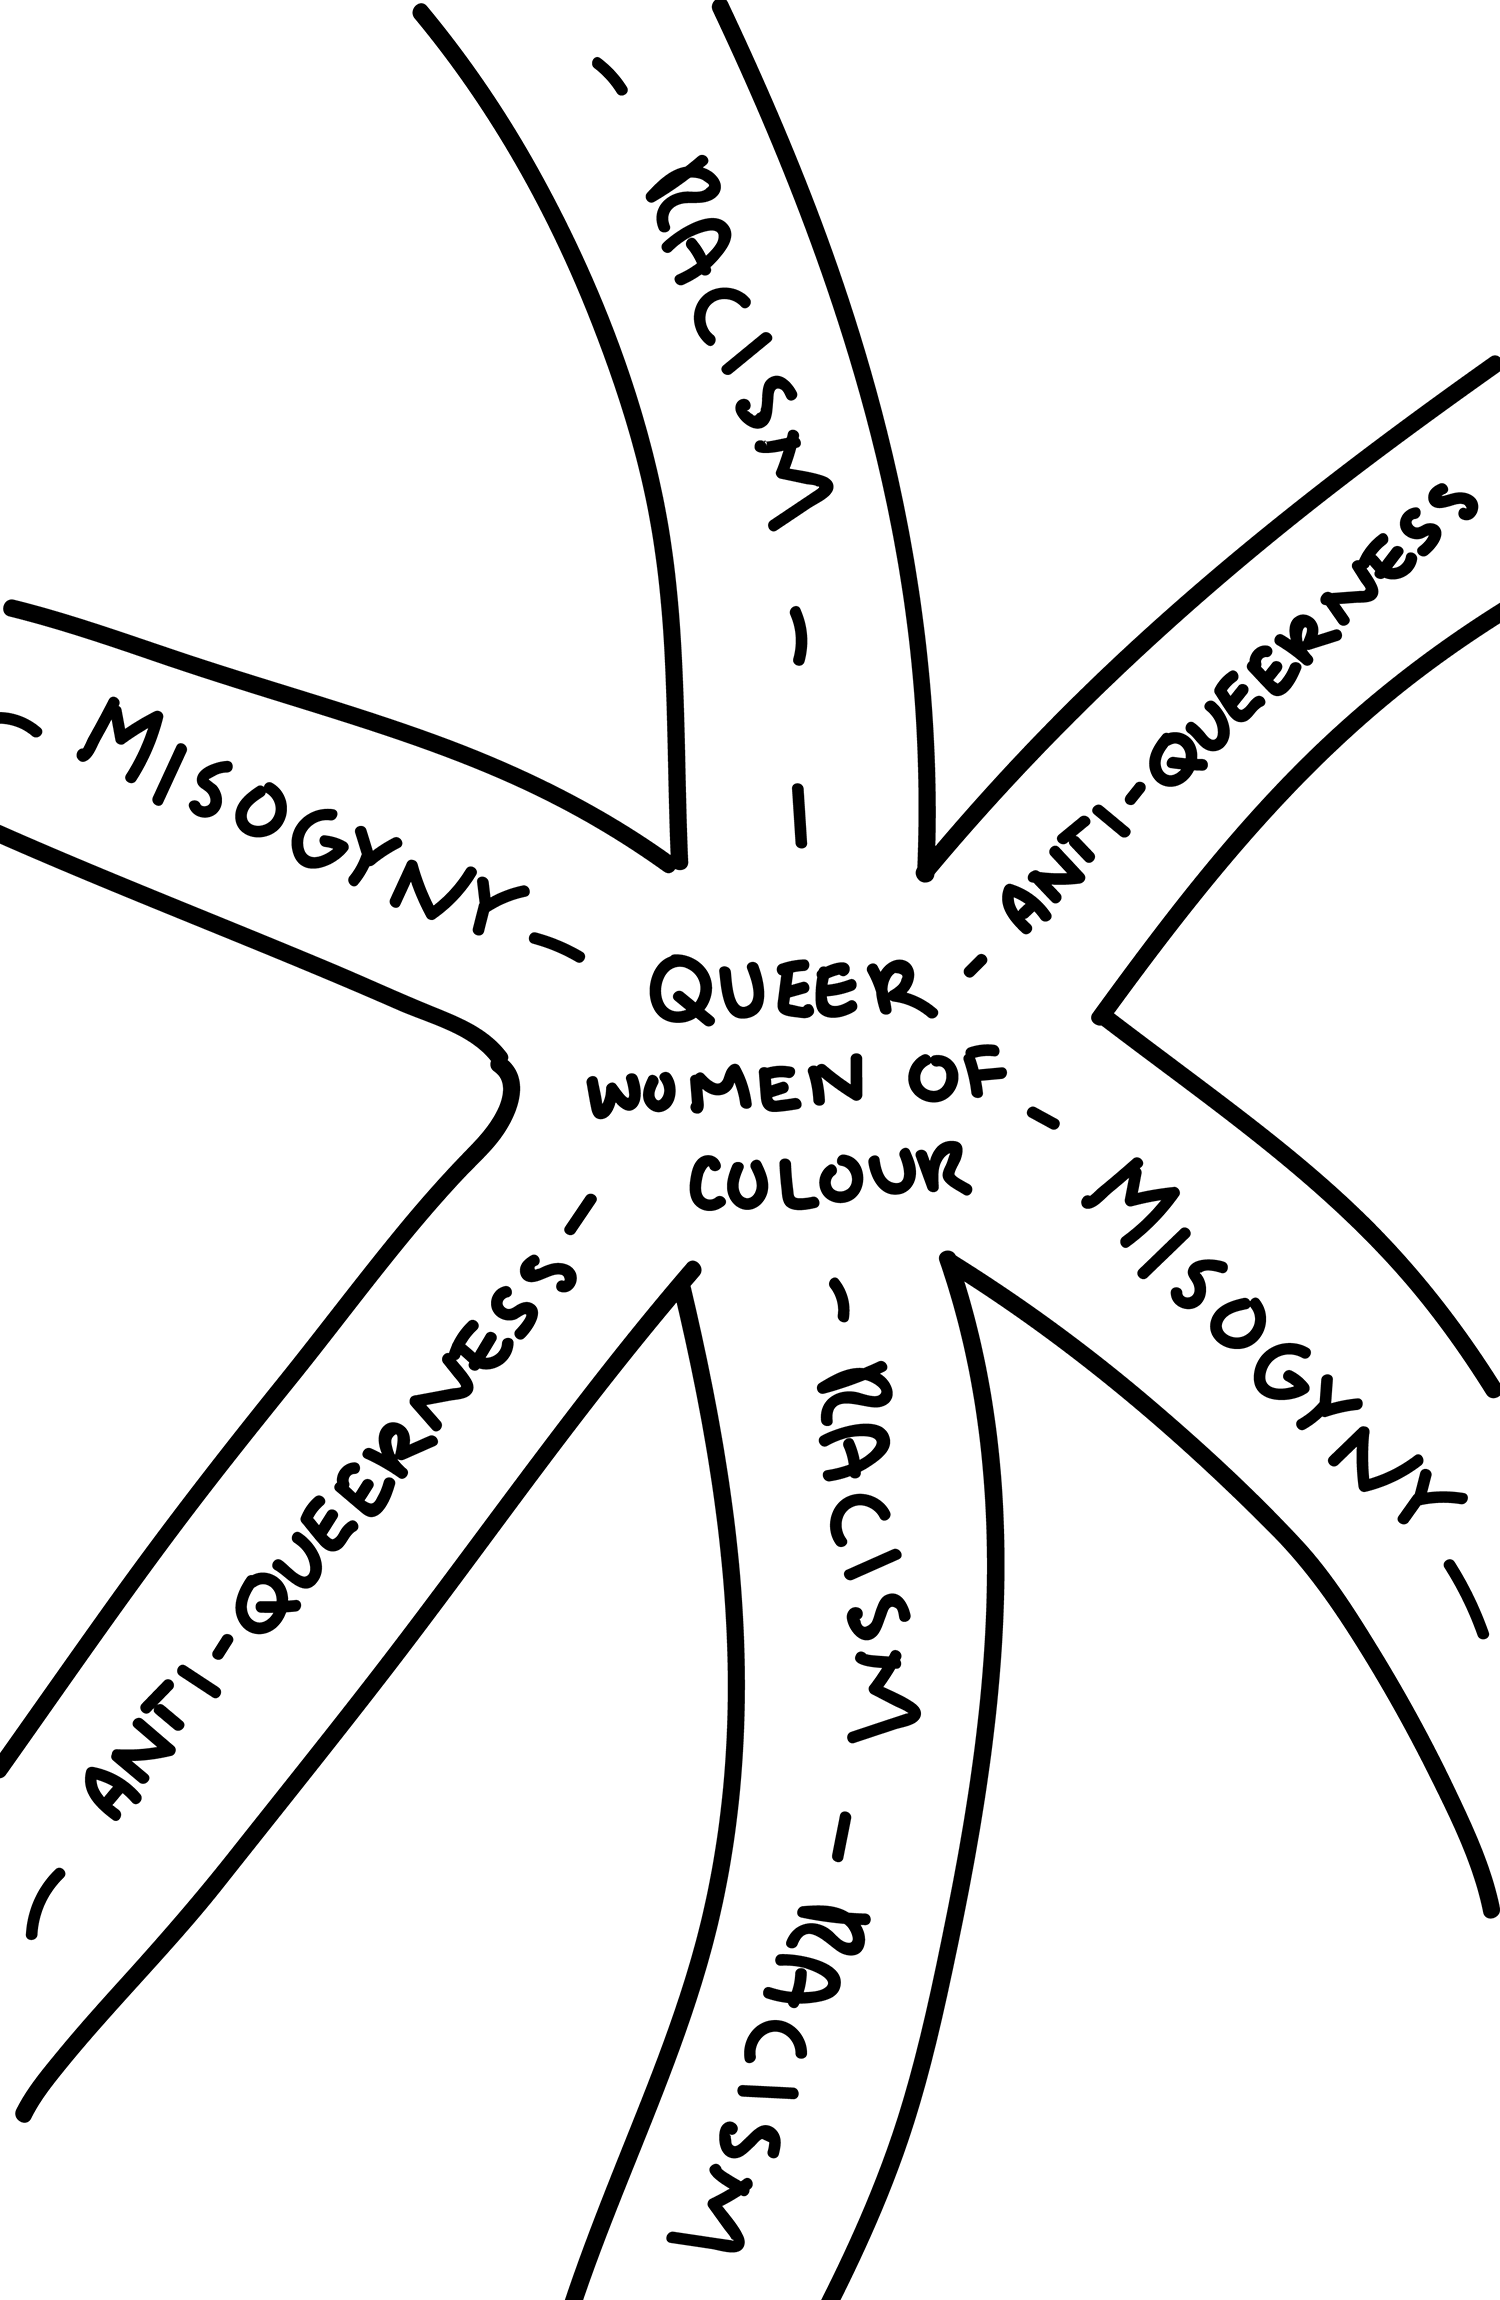 Queer women of colour at an intersection of oppression